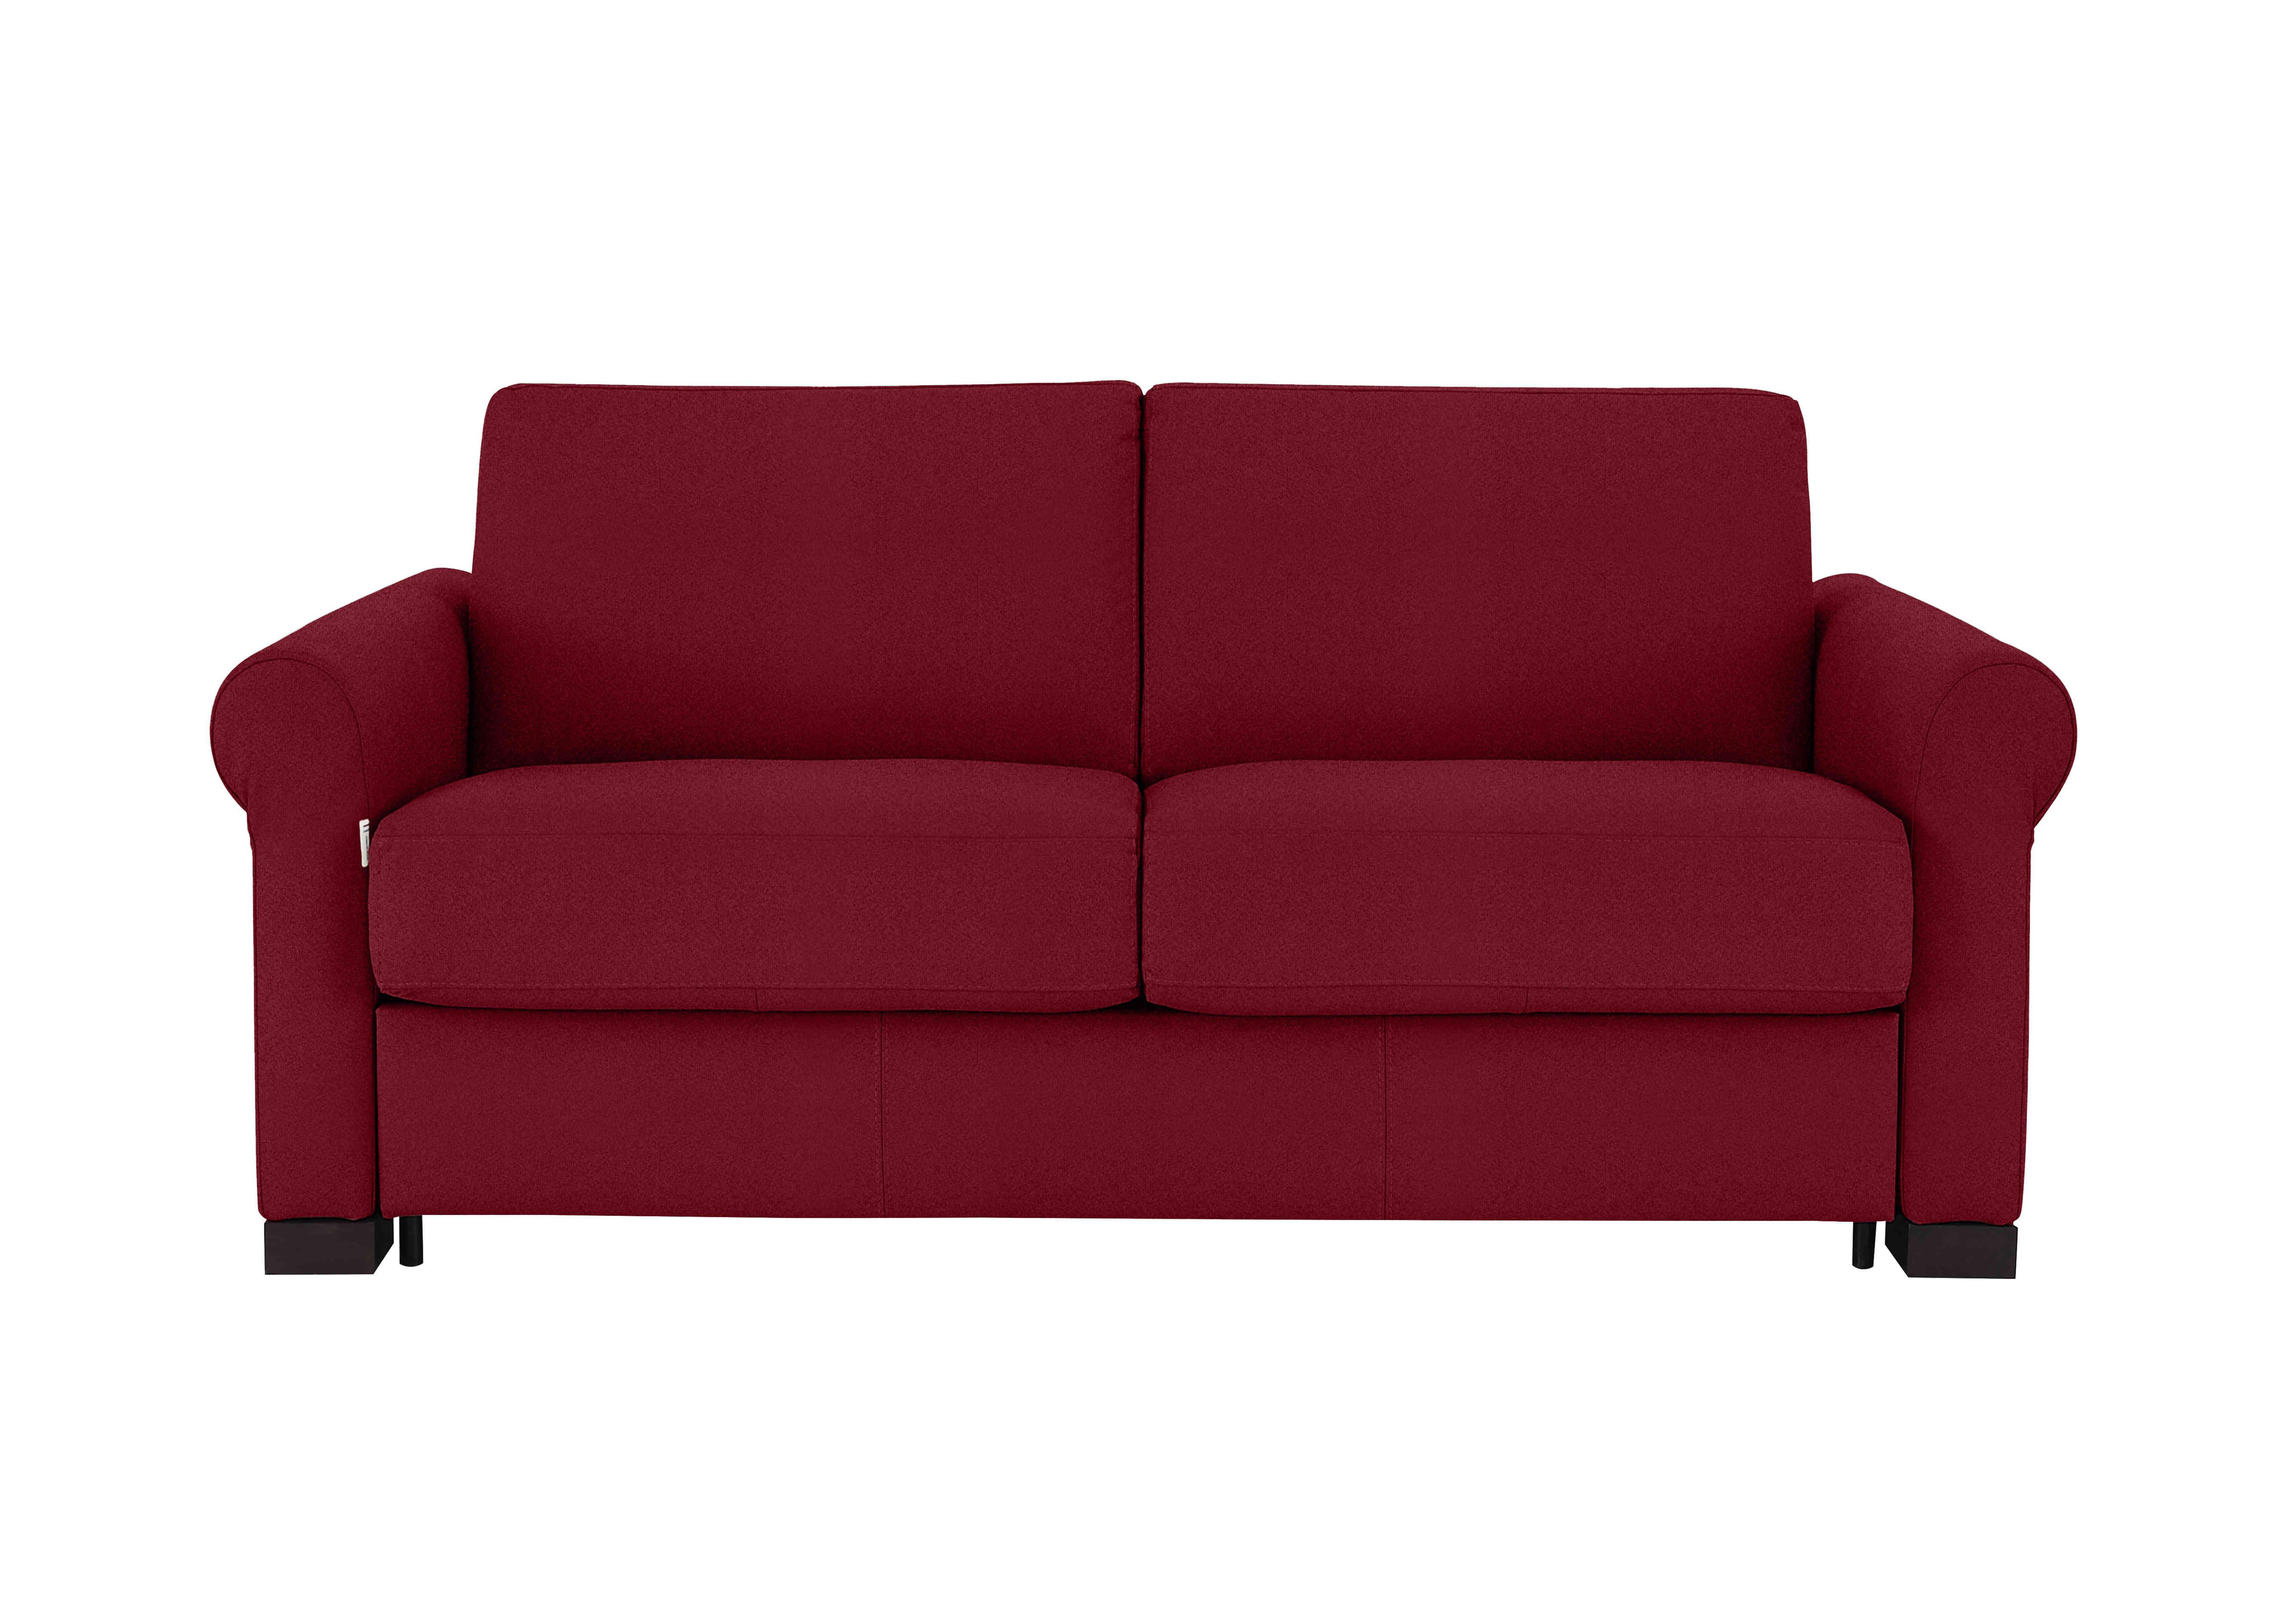 Alcova 2 Seater Fabric Sofa Bed with Scroll Arms in Coupe Rosso 305 on Furniture Village